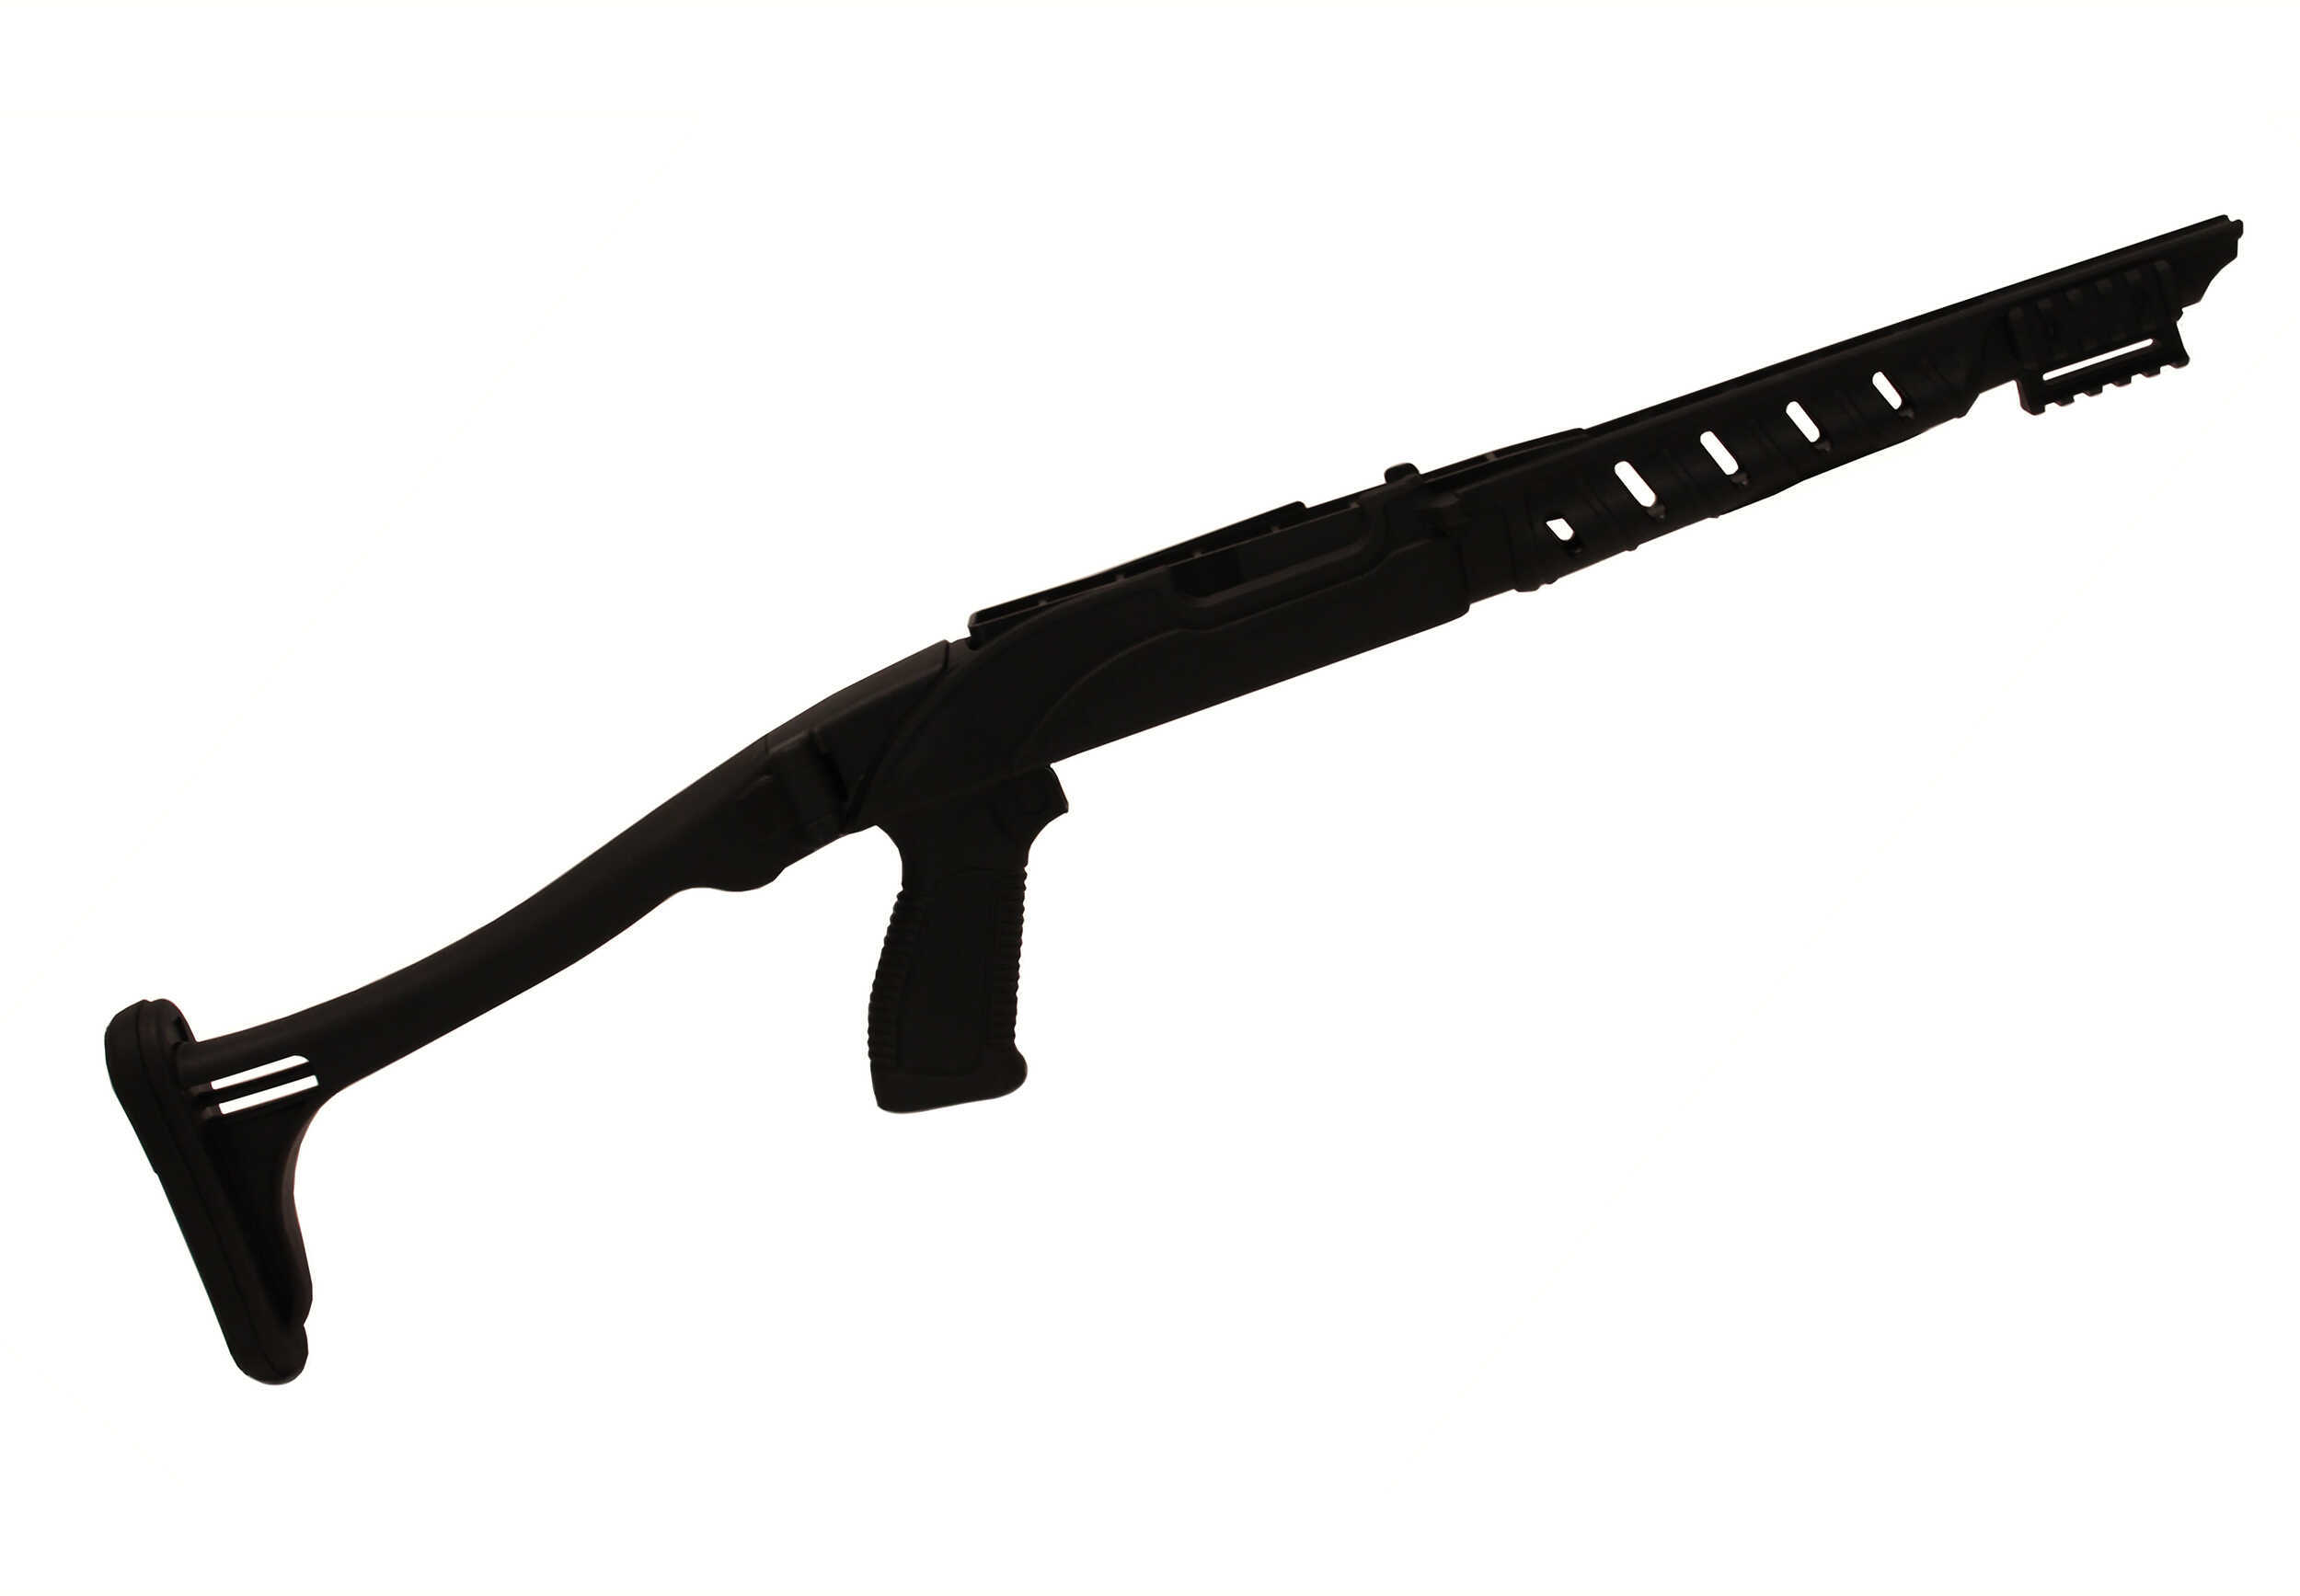 ProMag Ruger 10/22 Tactical Folding Stock -Black Md: PM272